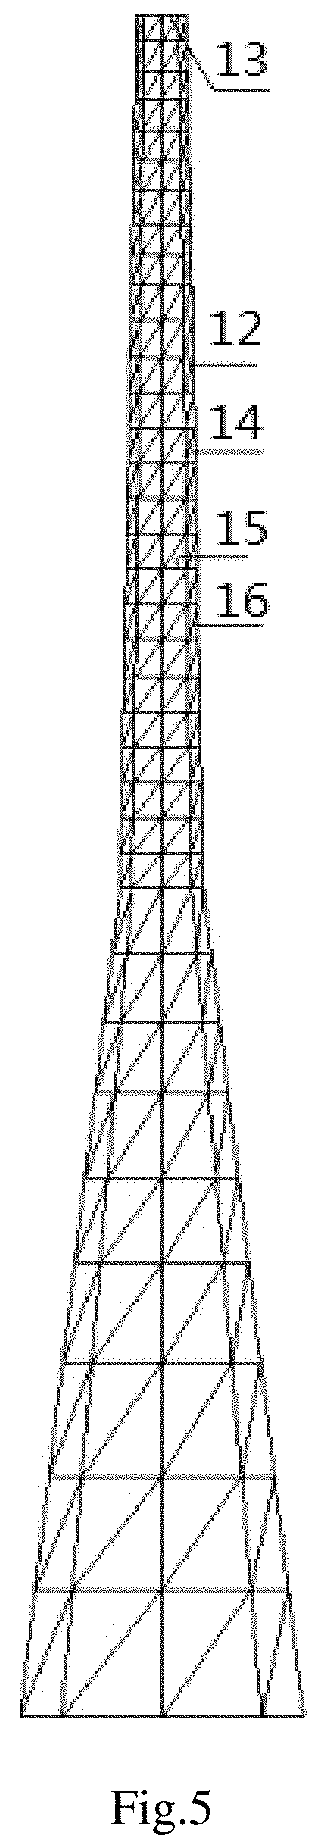 Connecting structure for steel tube truss and tower barrel of lattice wind power generation tower, prestressed polygon wind tower provided with circular box girder for direct fan on top of tower, wind power generation tower, and wind tower having prestressed anti-fatigue structure